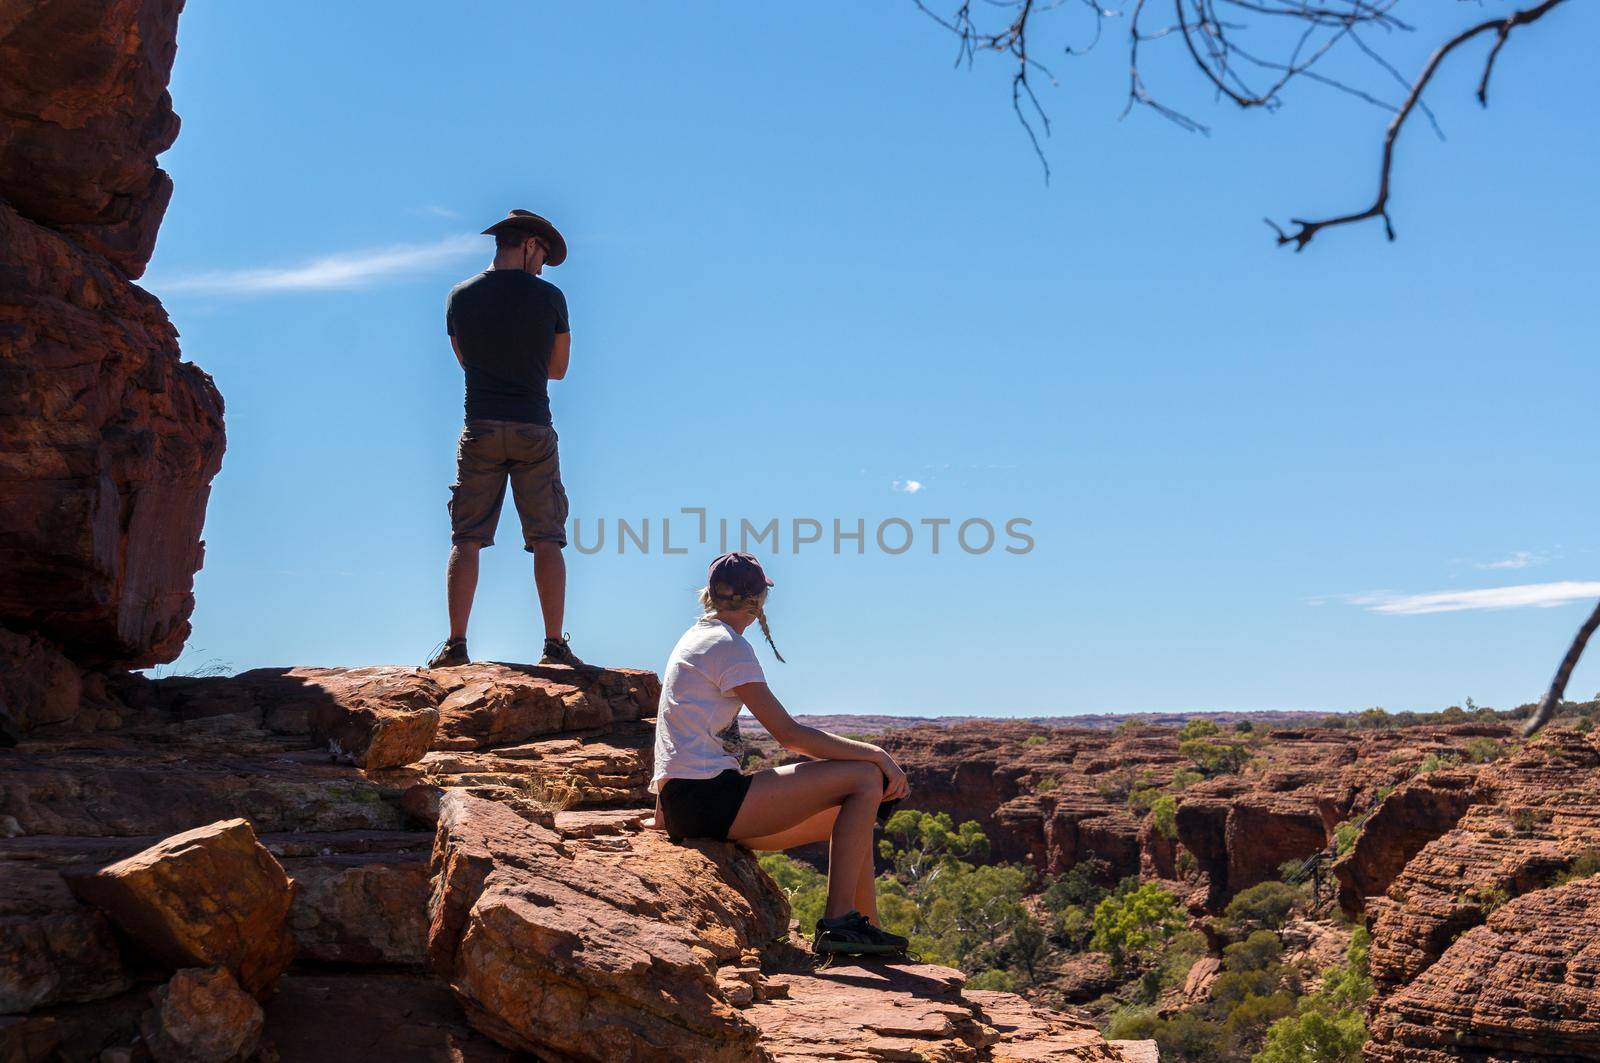 KINGS CANYON, AUSTRALIA May 5, 2015: young women and man enyoing view of the Kings Canyon